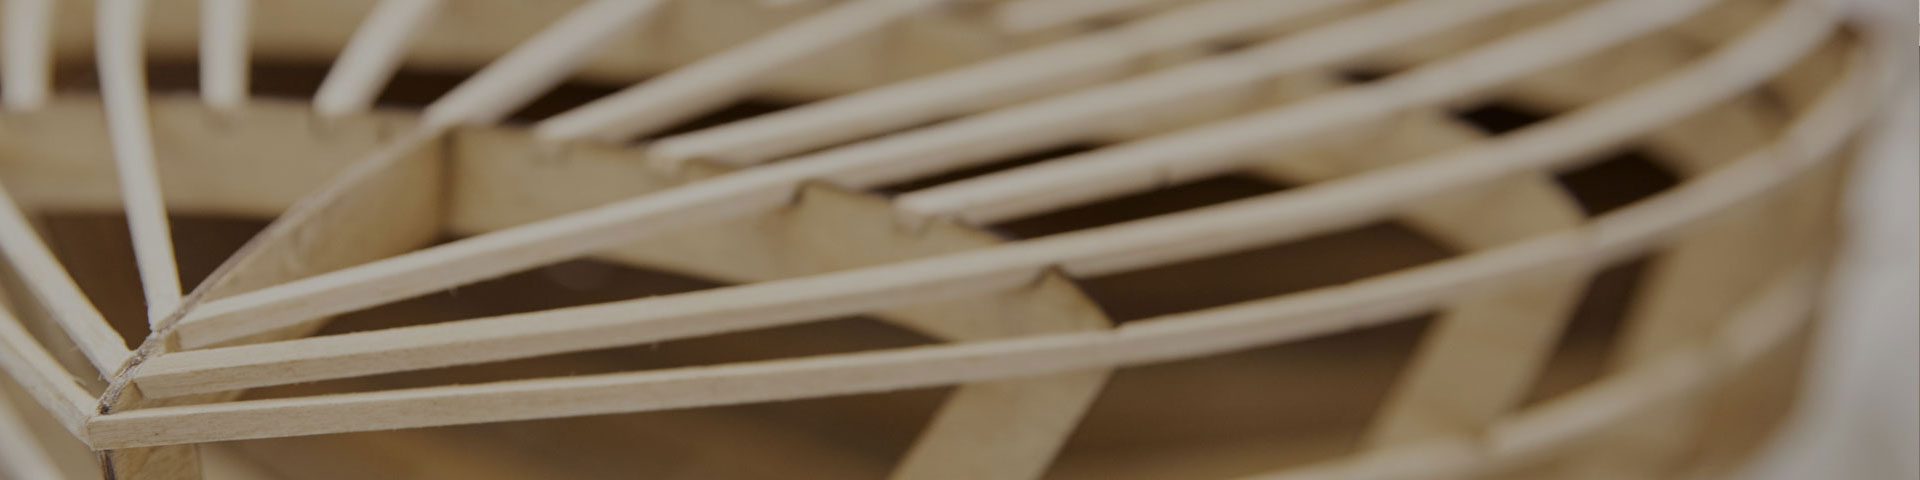 Close-up of the wooden structure of a model yacht's hull